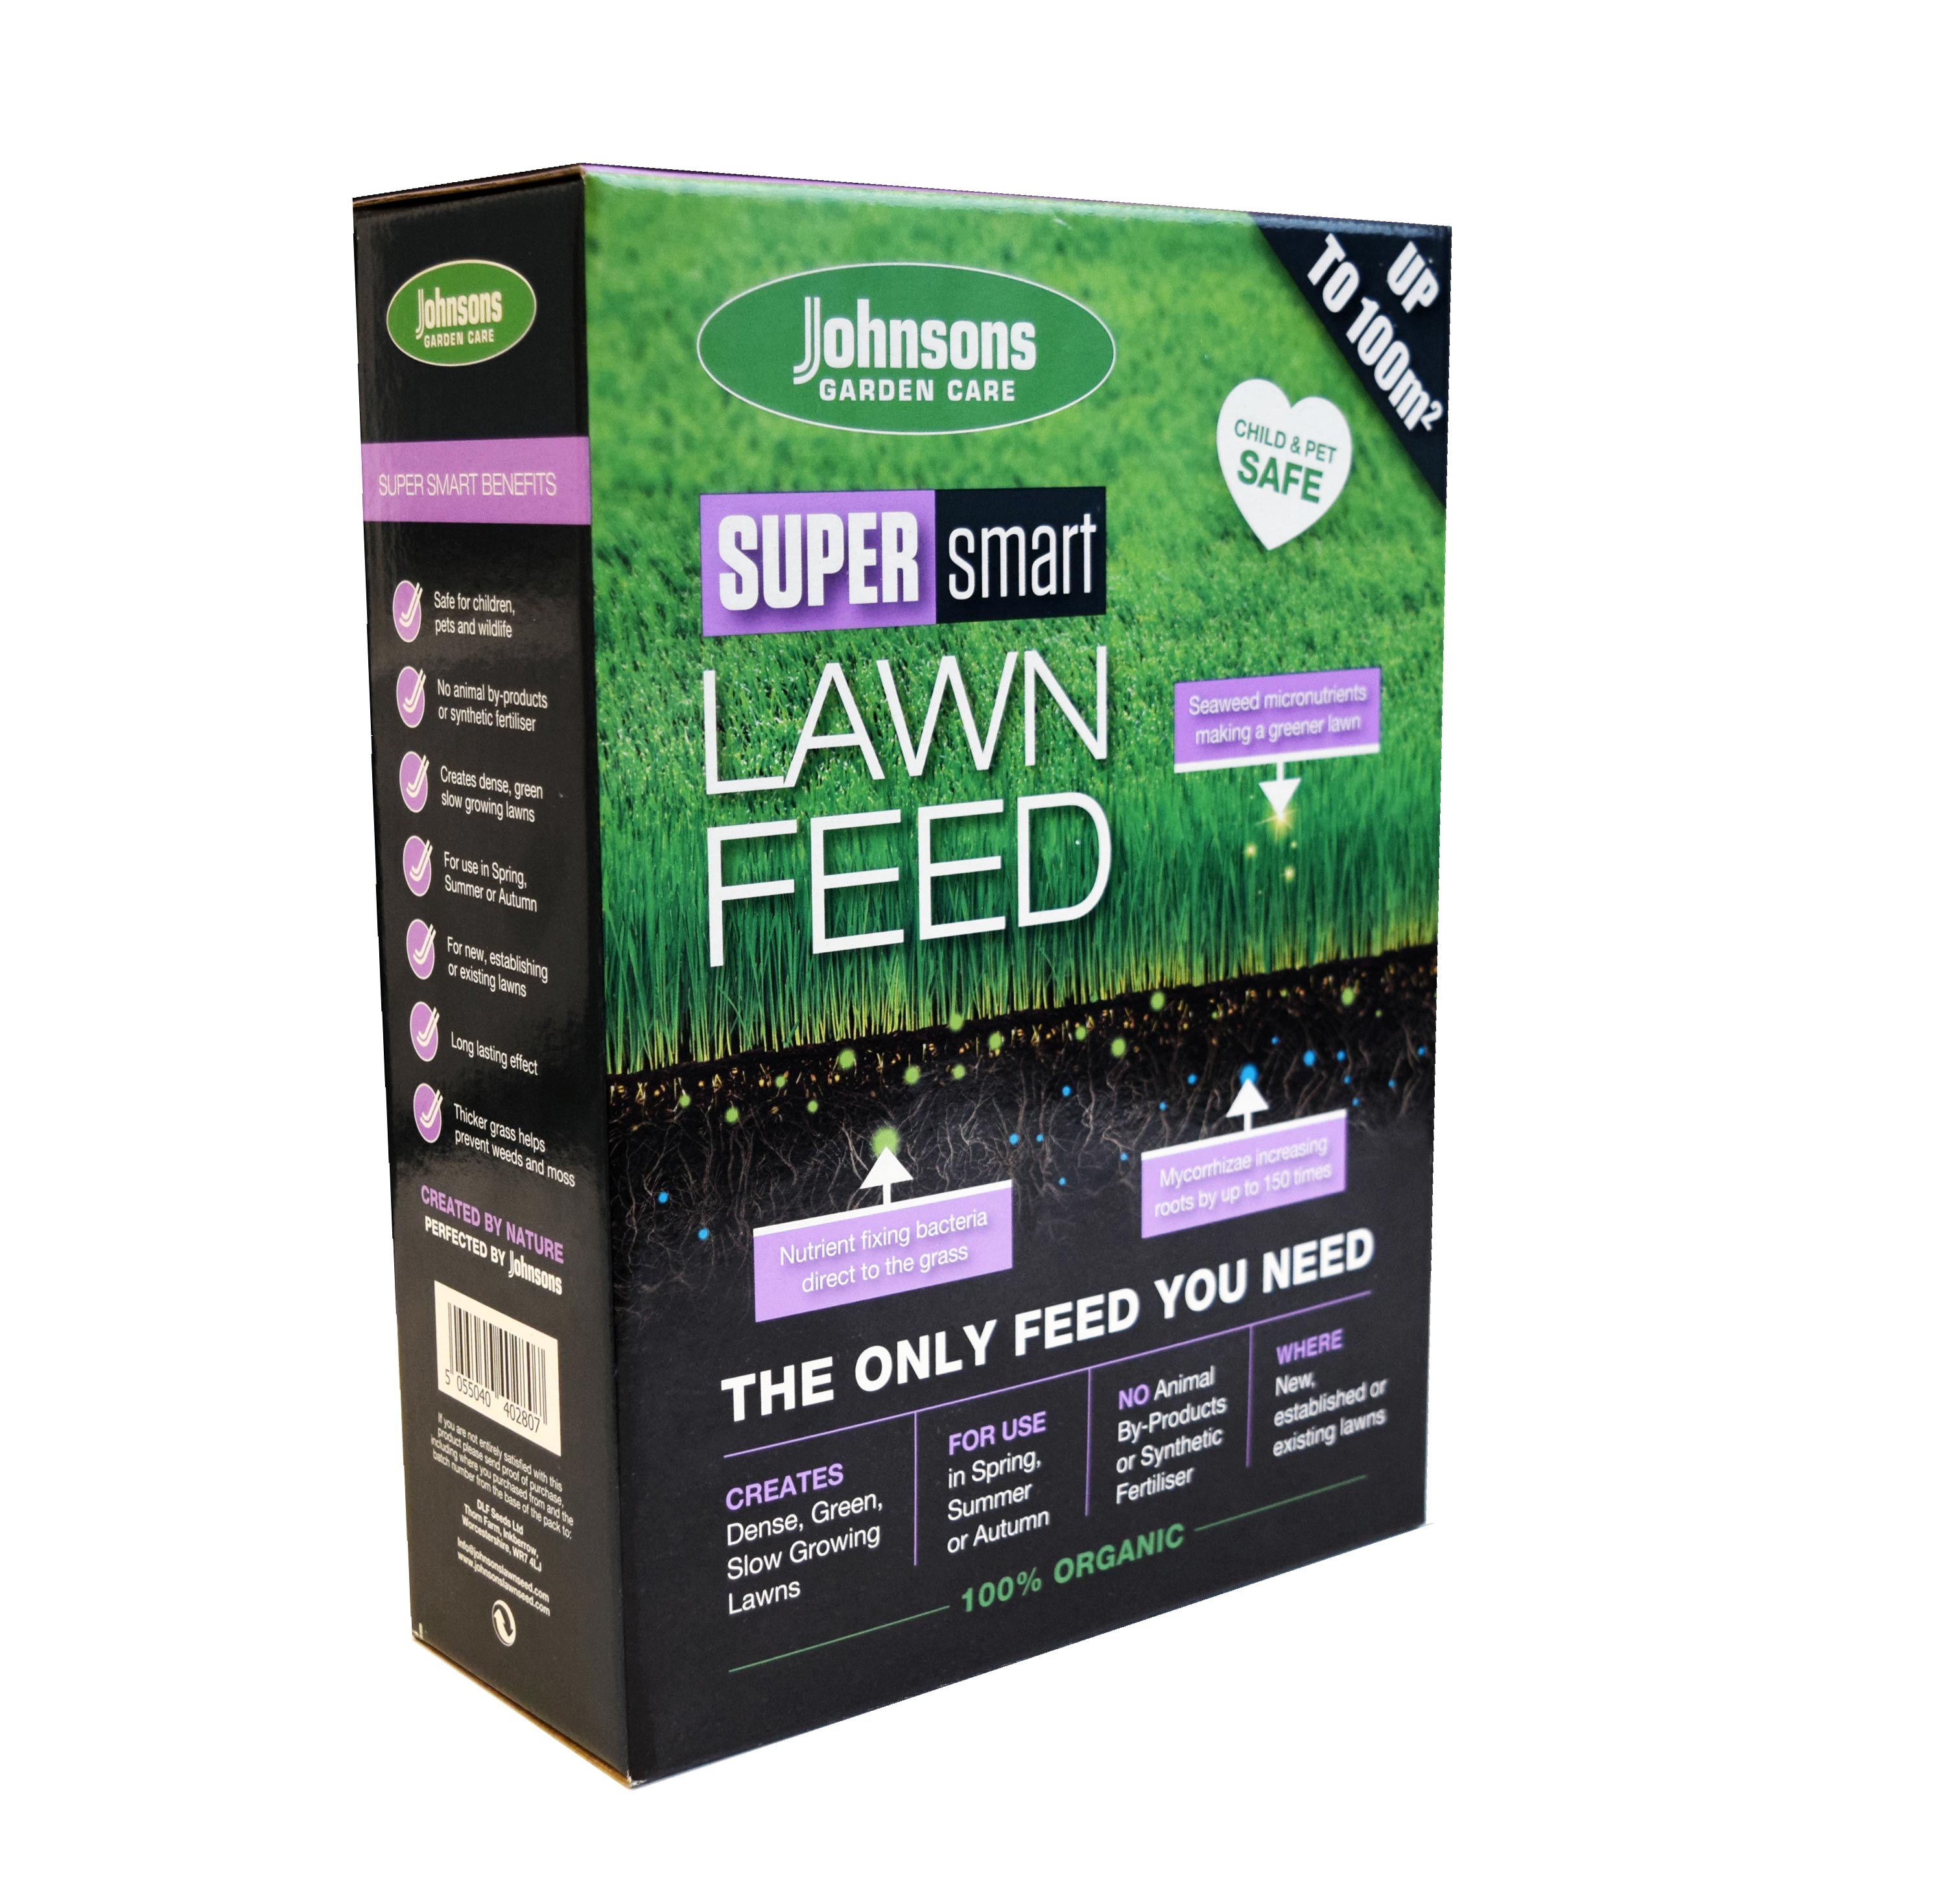 Super Smart Lawn feed 100% Organic Ingredients child and pet friendly